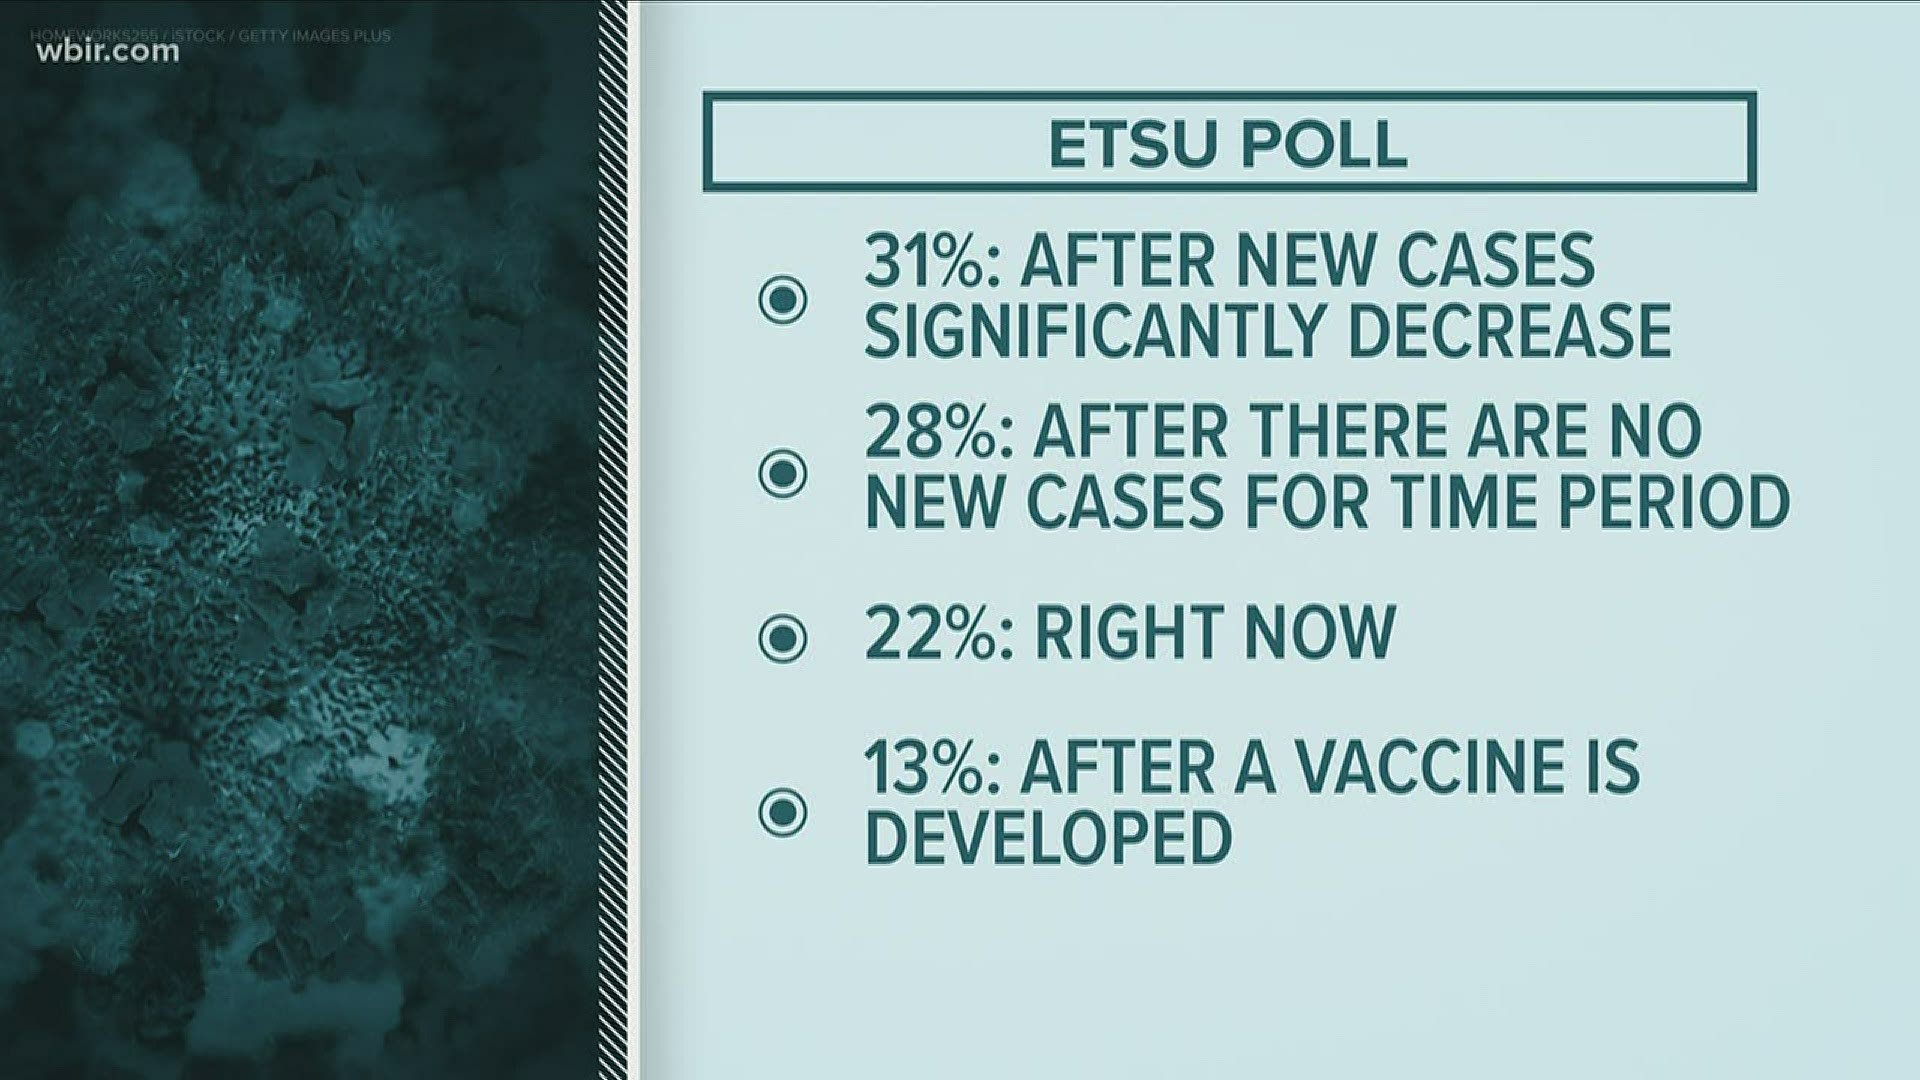 Most Tennesseans polled said their greatest concern was either catching the virus or having a loved one catch it.